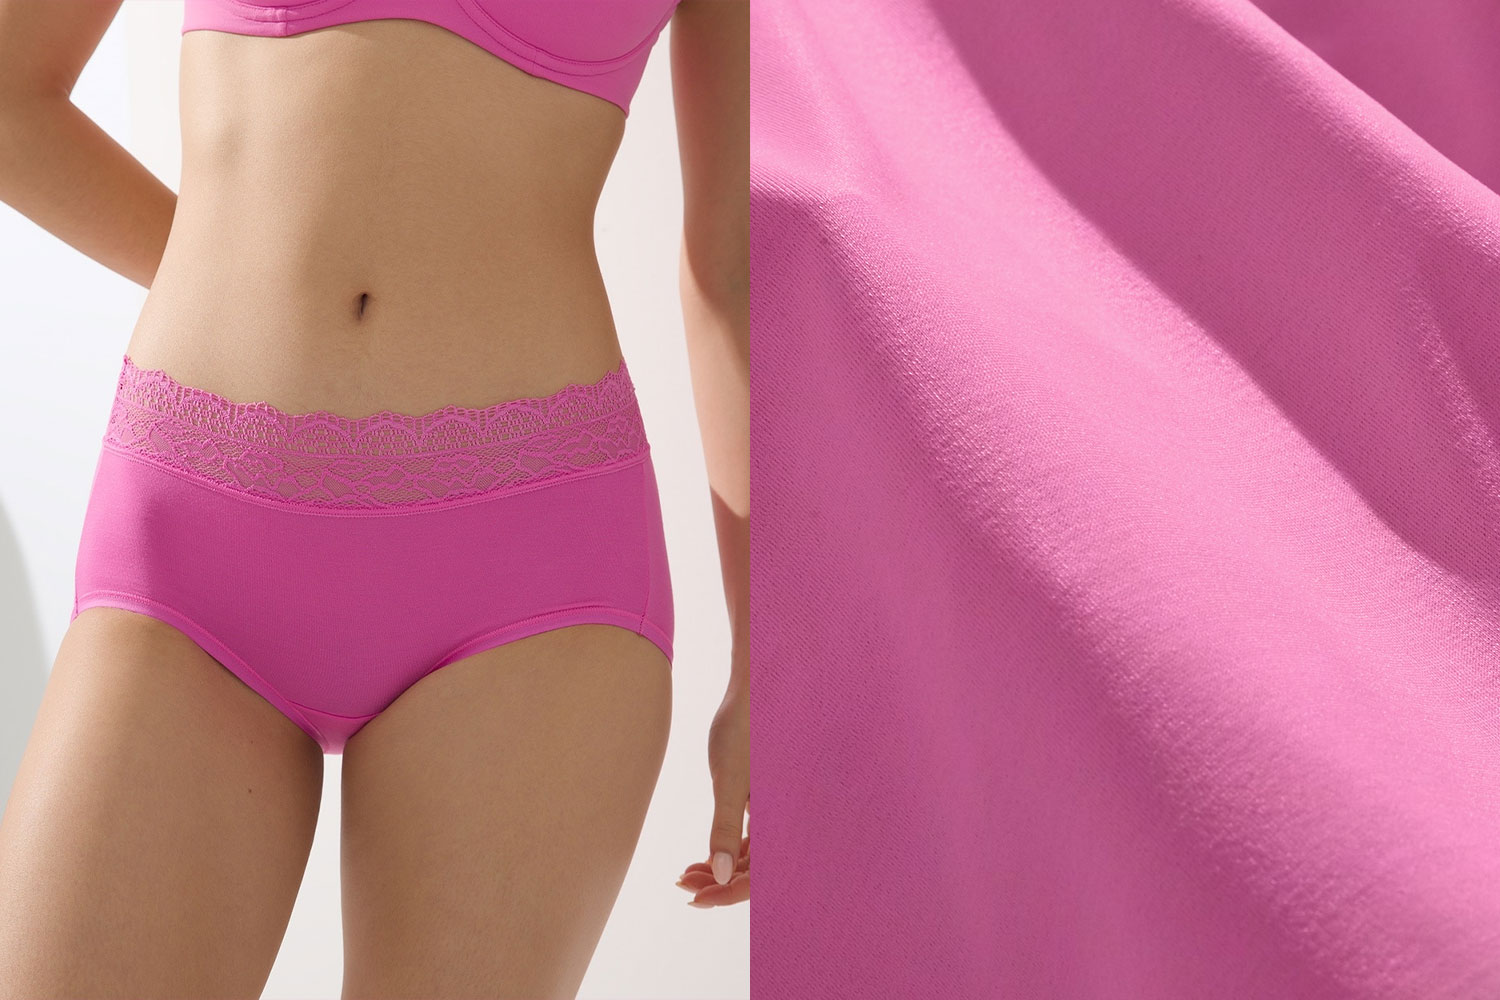 Soma women's model wearing a pink bra and pink panties with recycled nylon lace trim next to a close-up image of the fabric.